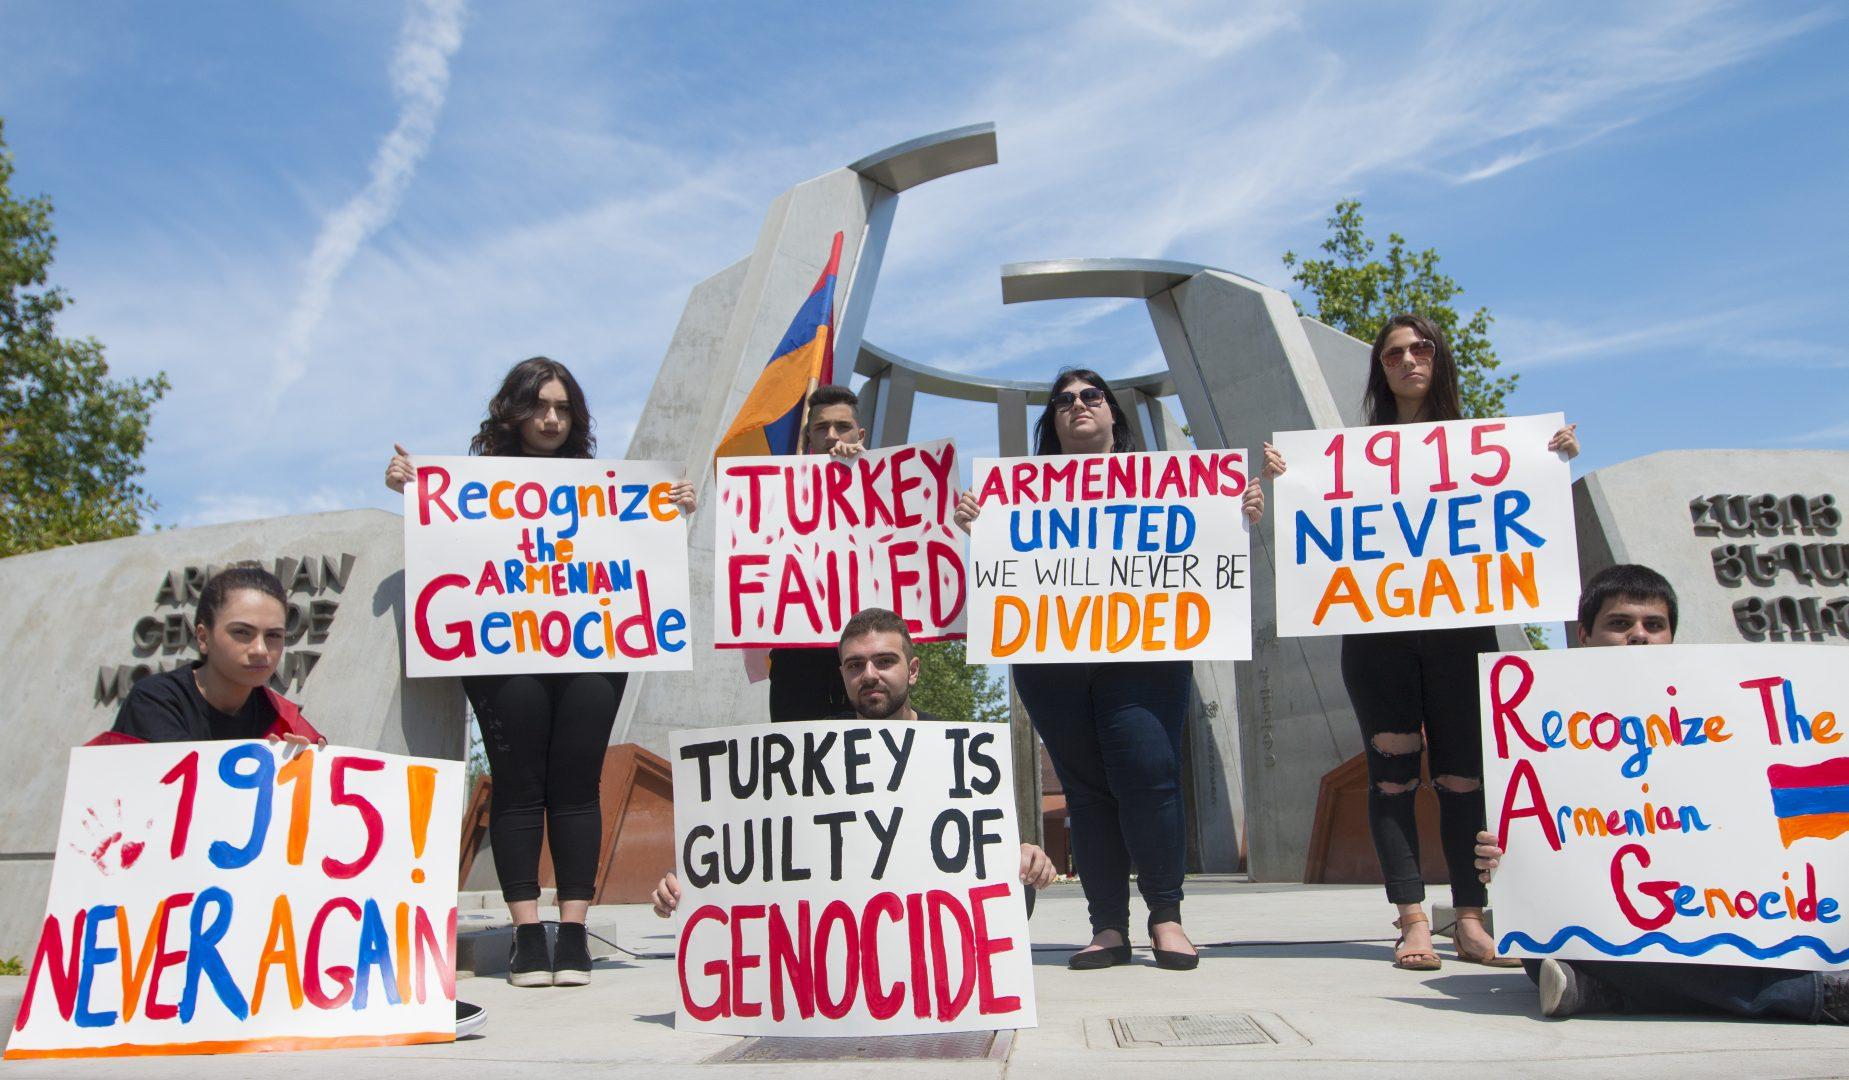 The Armenian Student Organization holds a silent protest at Armenian Genocide Monument during the Commemoration of the Armenian Genocide on April 24, 2018.